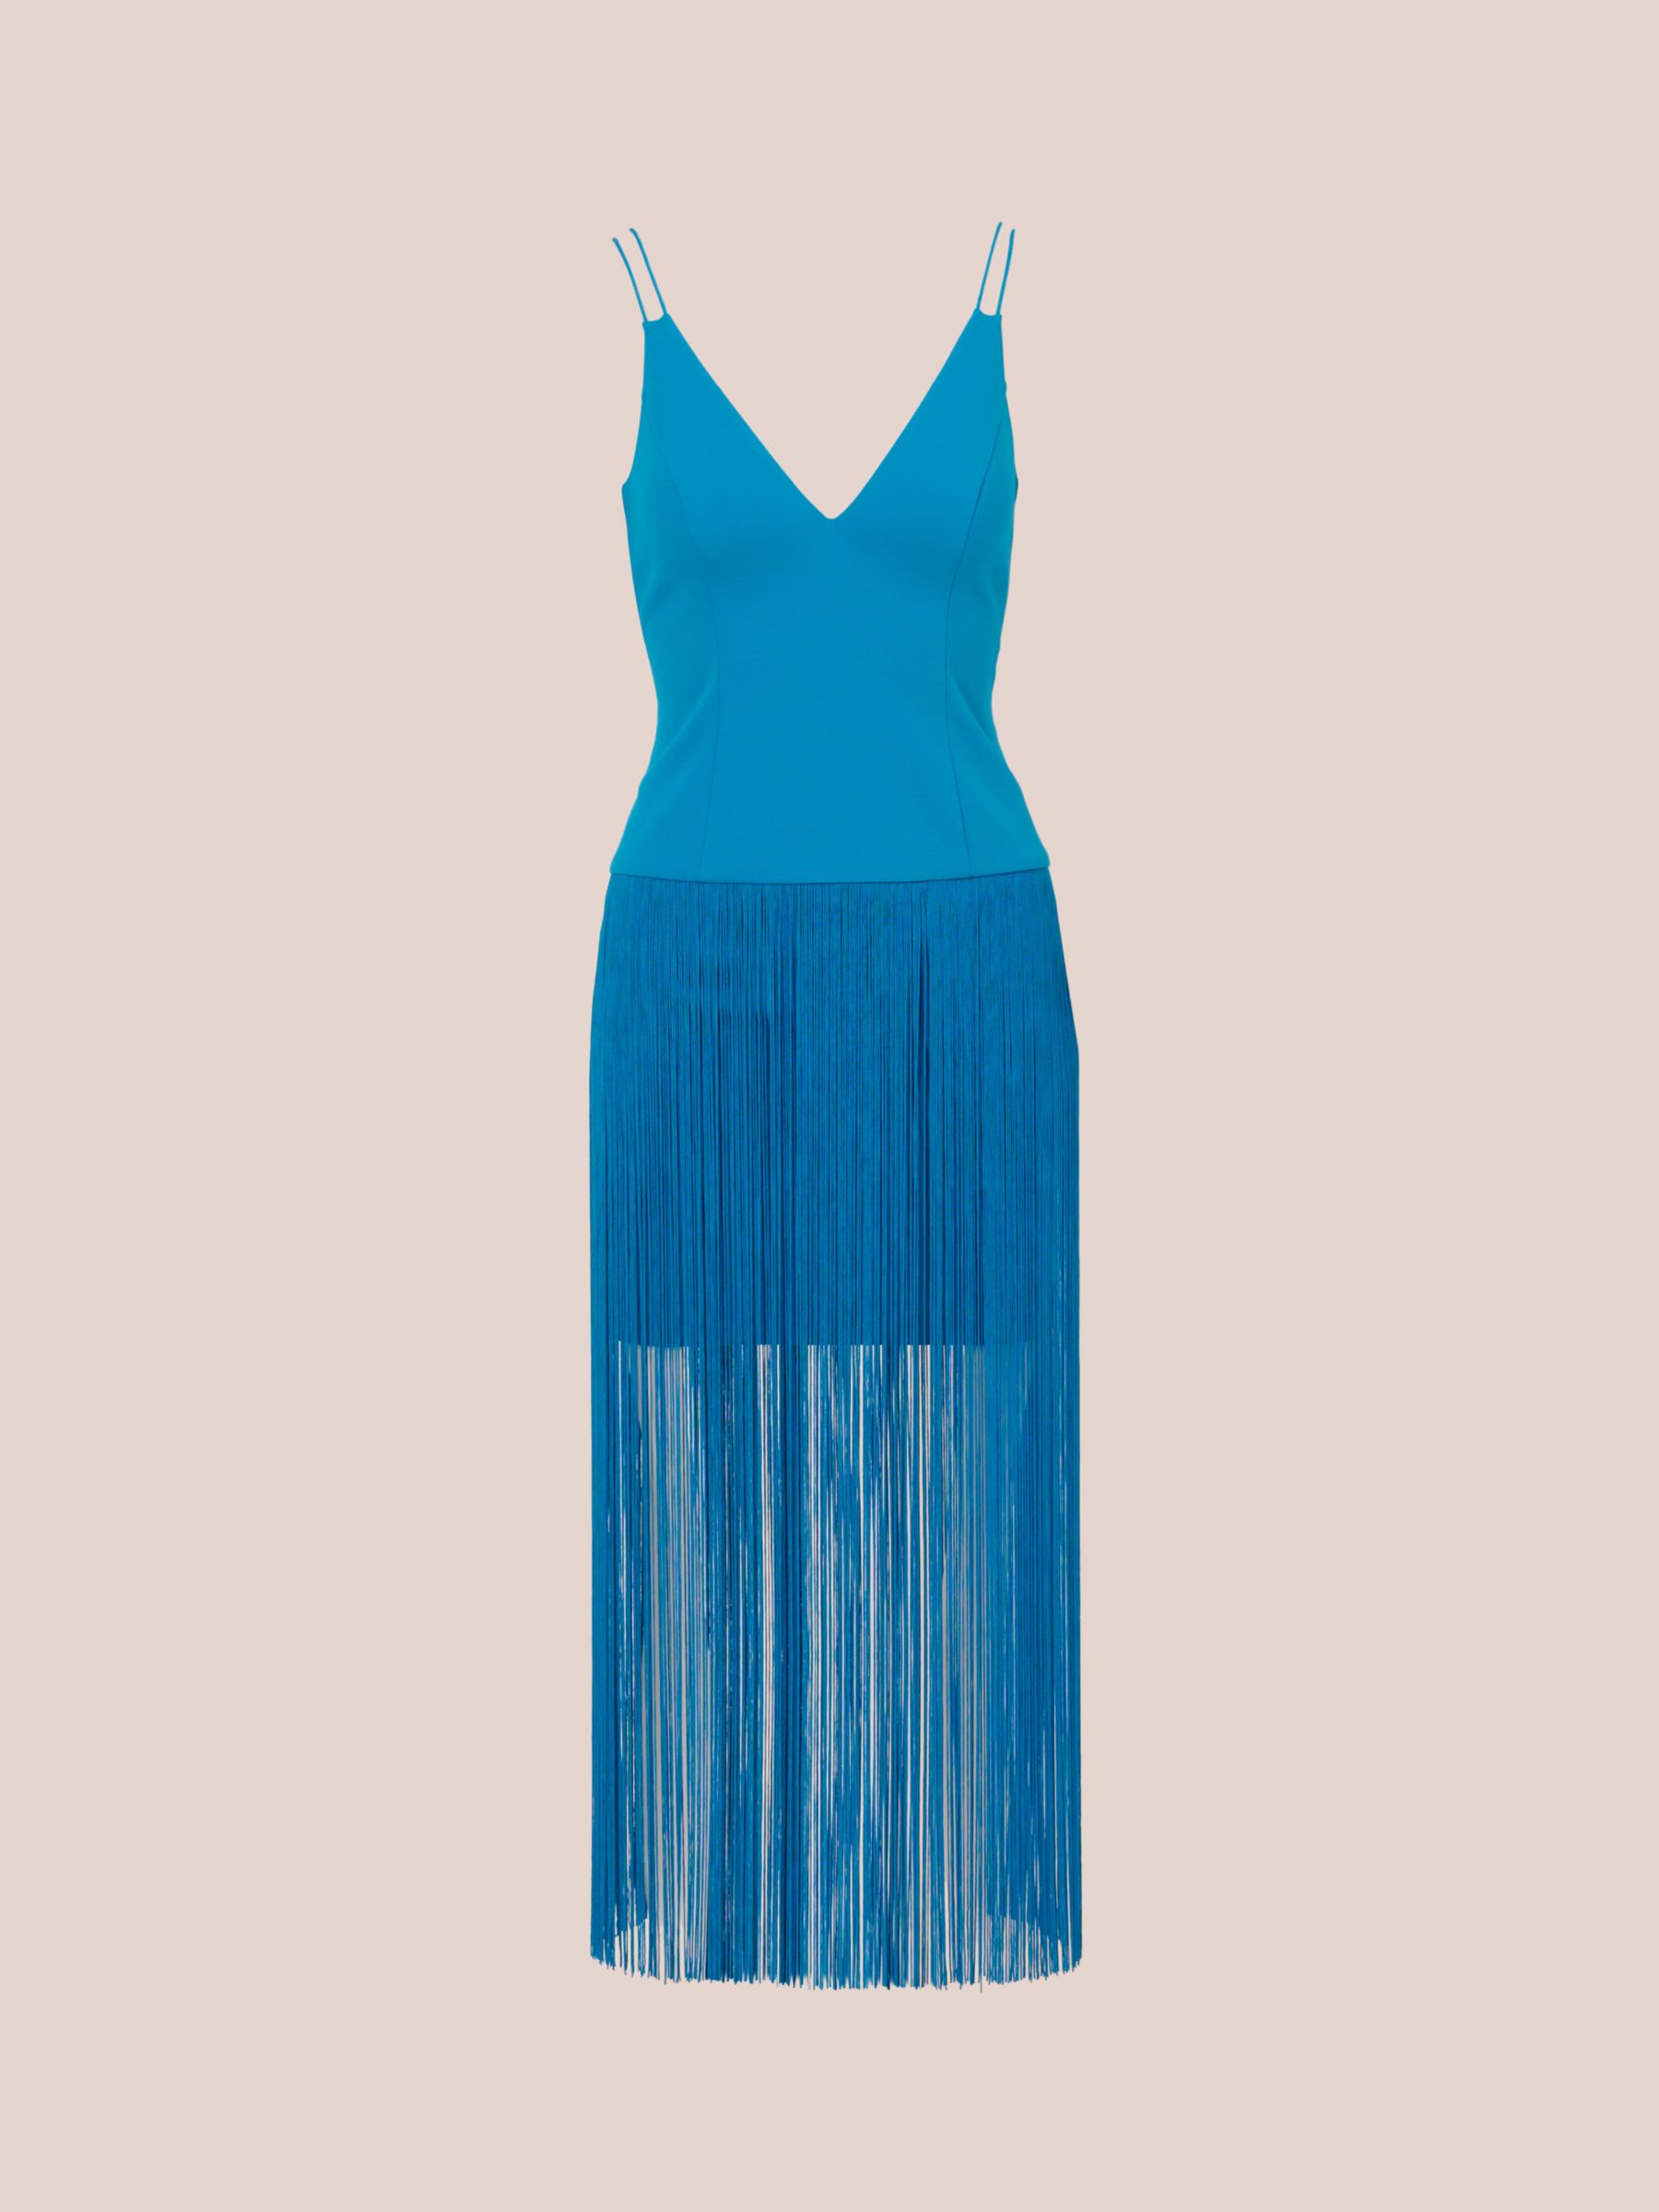 Adrianna by Adrianna Papell Knit Crepe Fringe Dress, Deep Cerulean, 8